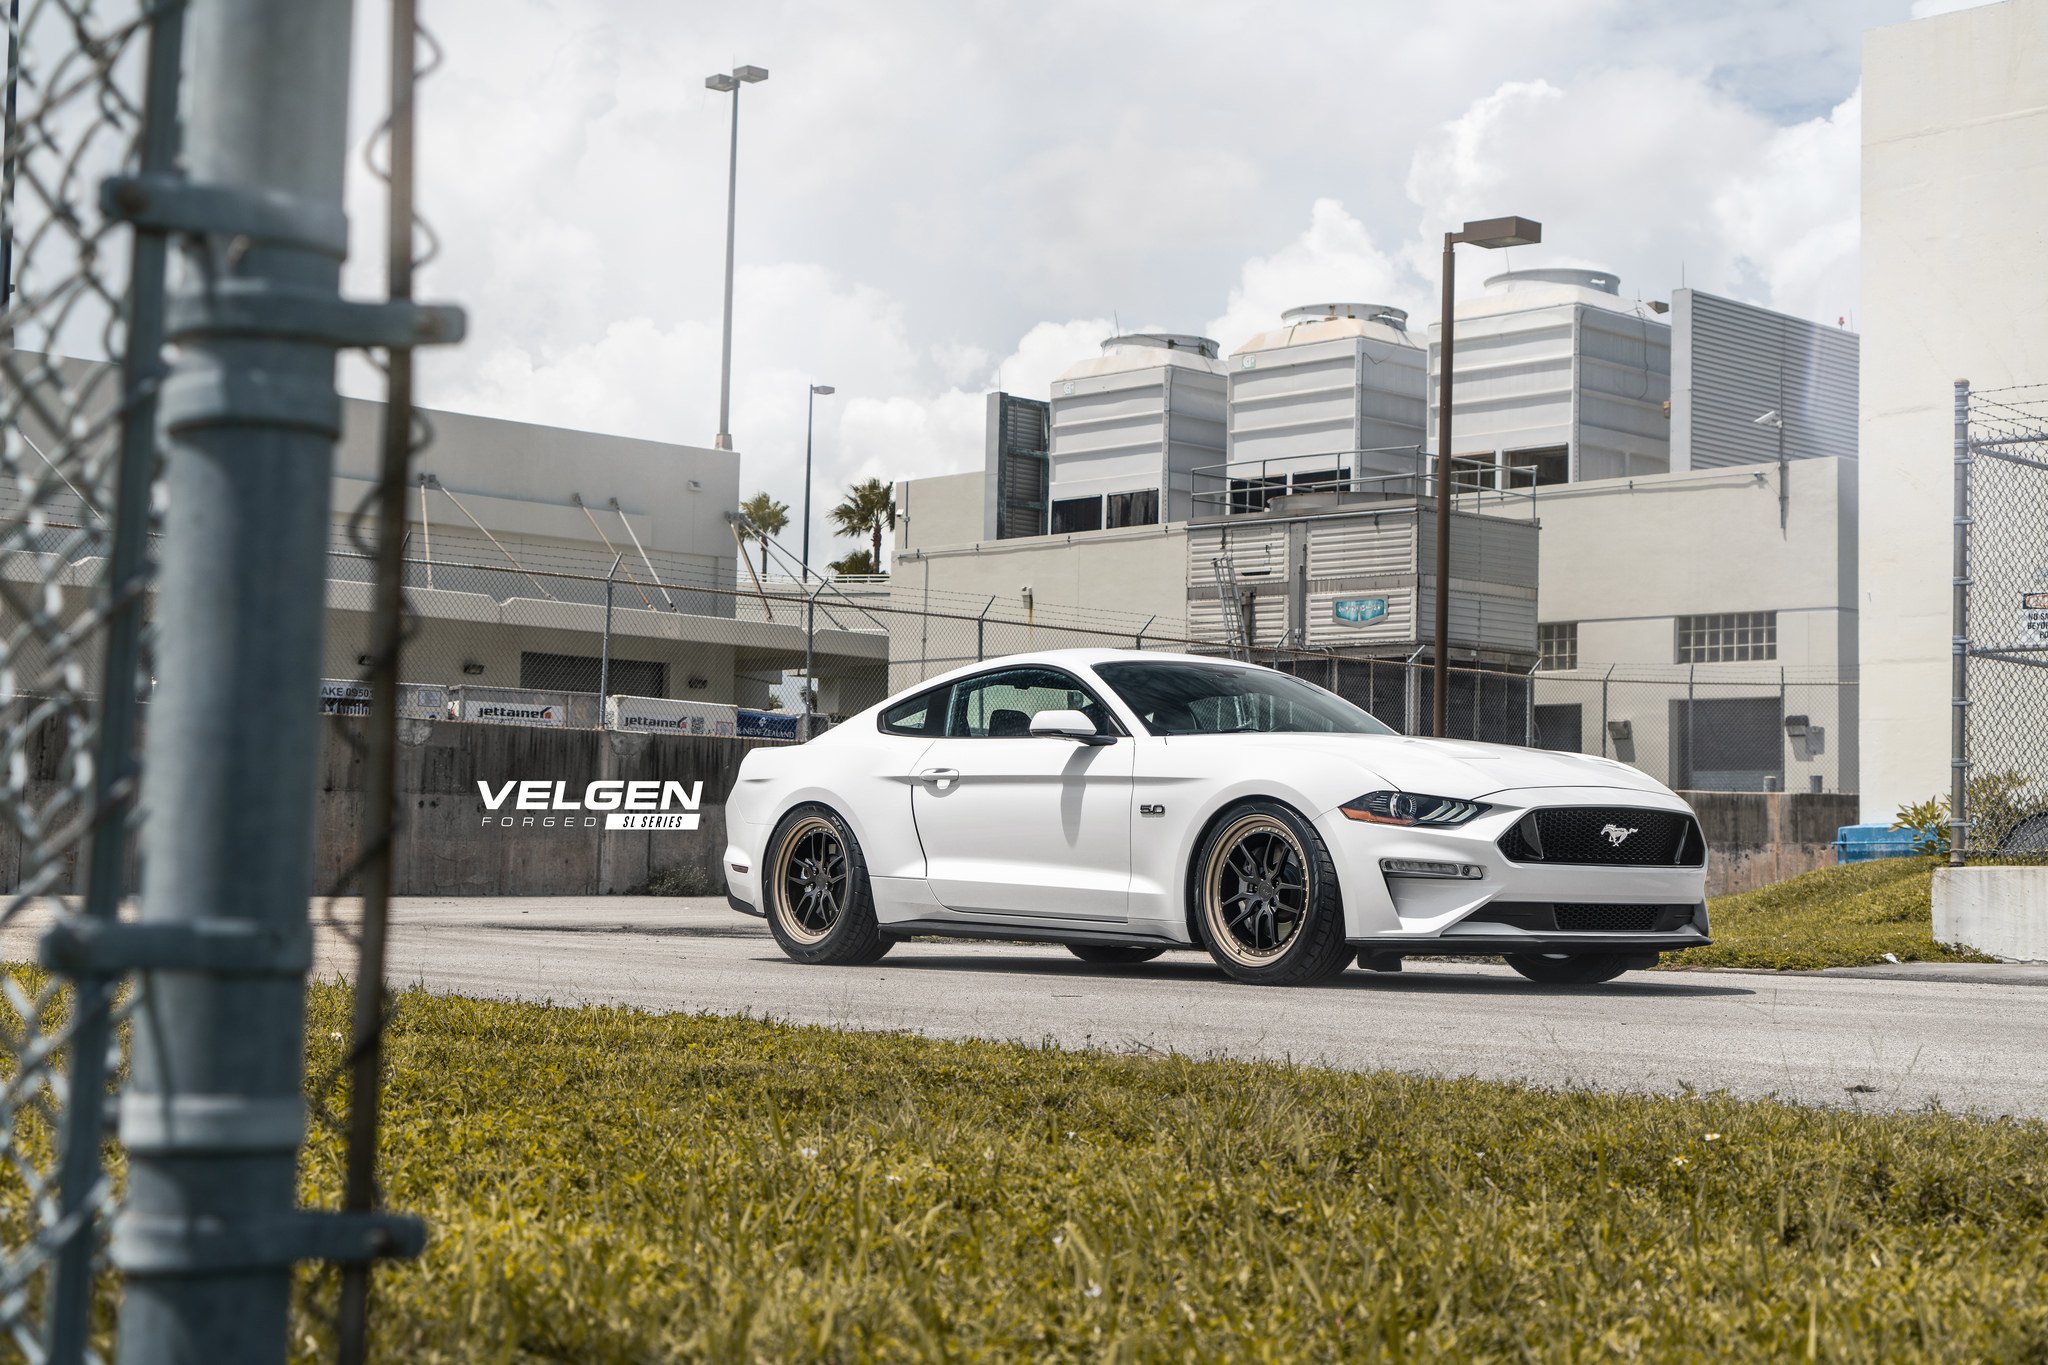 White Ford Mustang 5.0 with Custom Side Skirts - Photo by Velgen Wheels